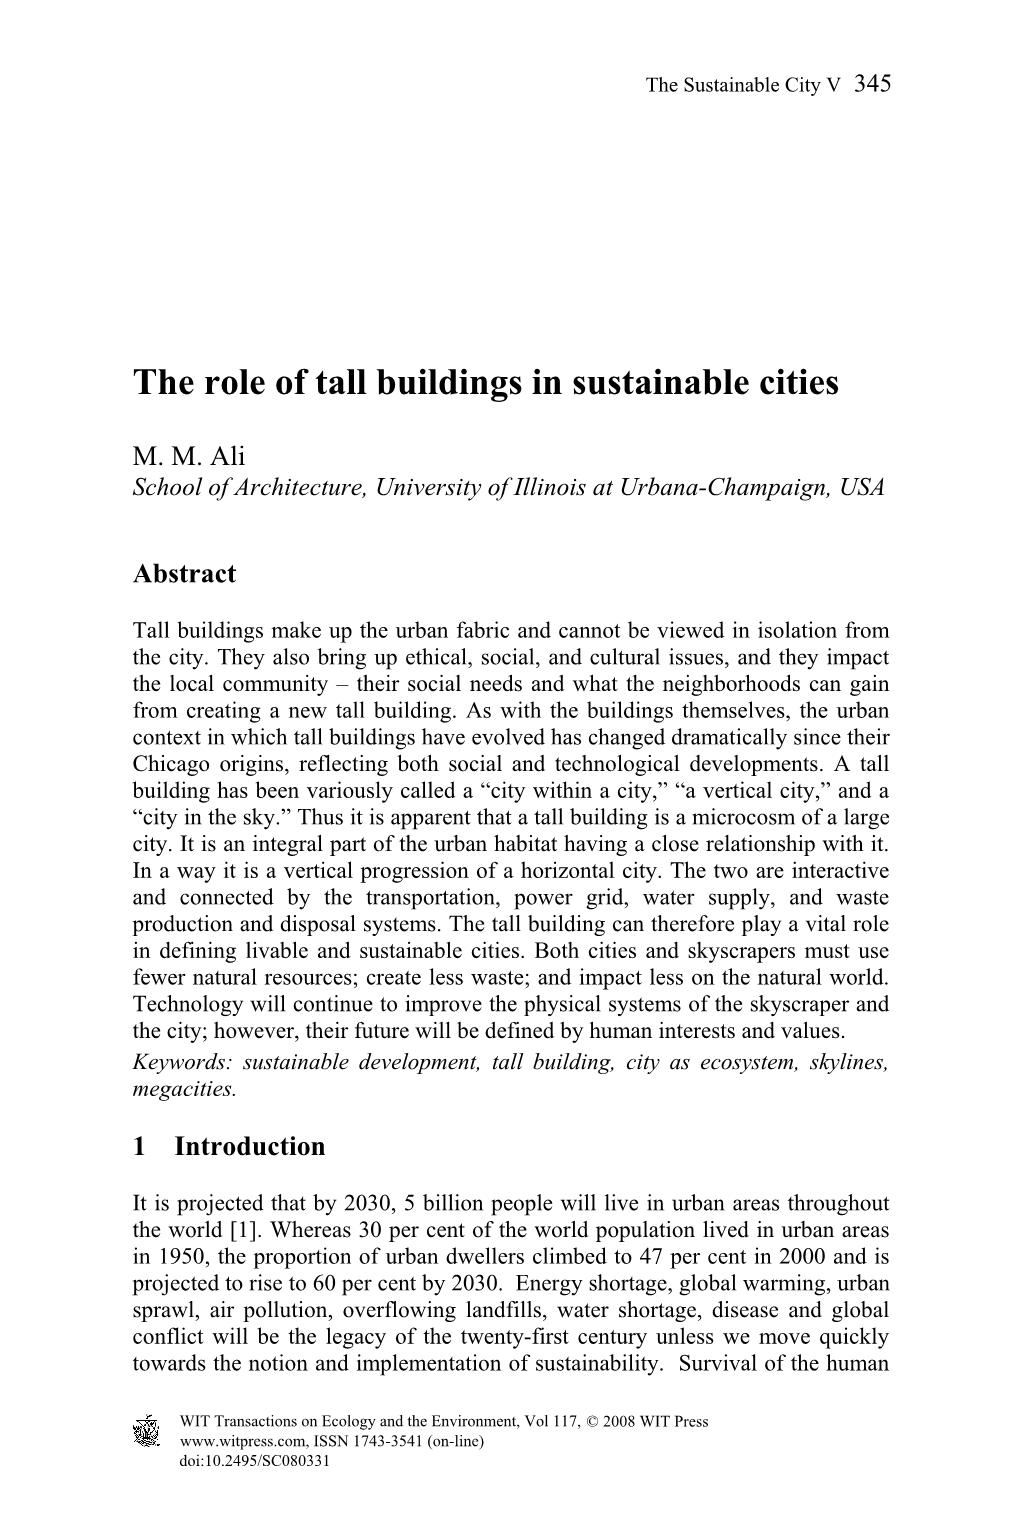 The Role of Tall Buildings in Sustainable Cities